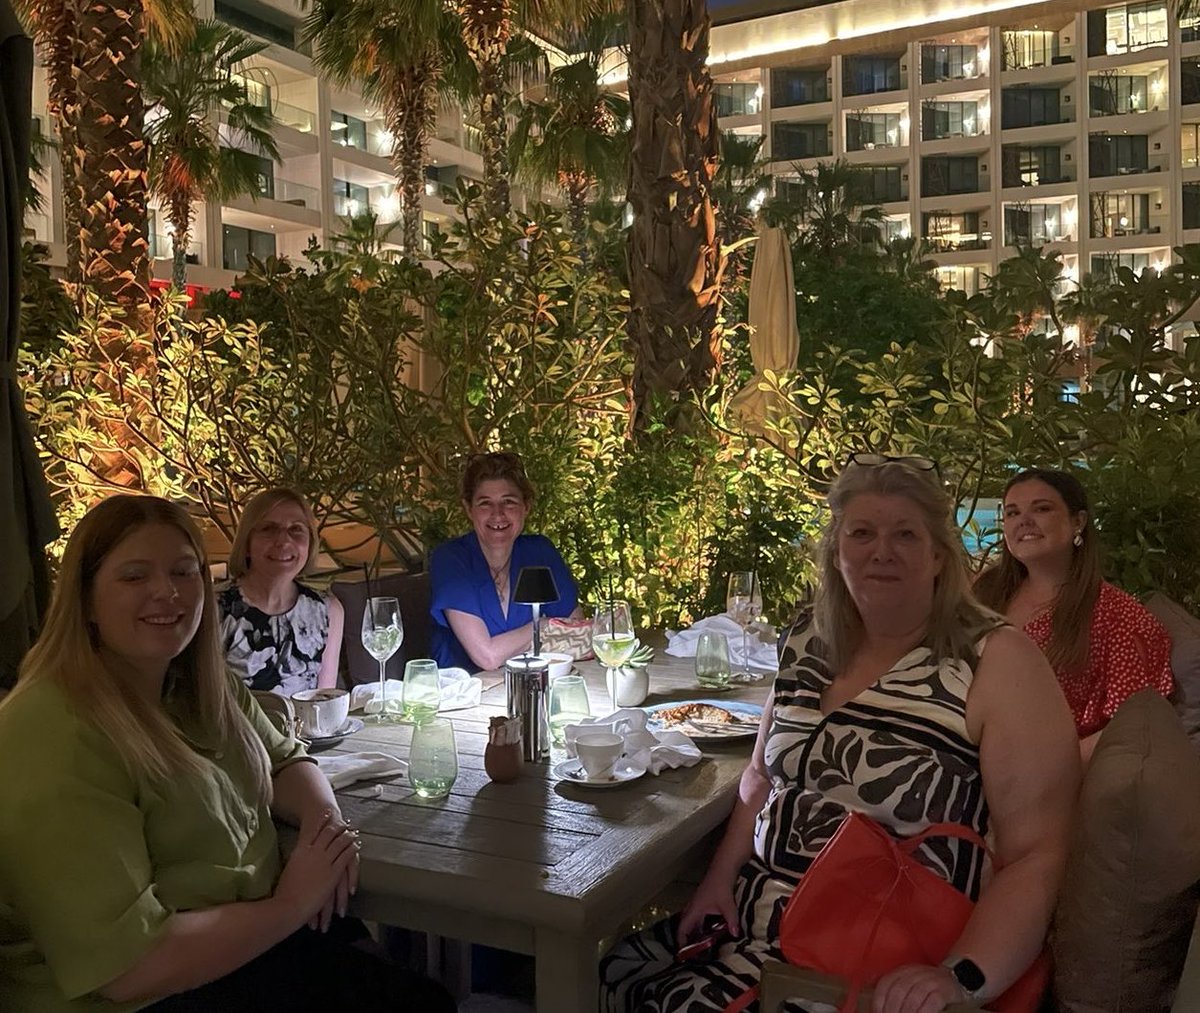 What a great evening, putting the edu reading world to rights in a beautiful setting! Thank you ⁦@maryroseg⁩ for hosting, ⁦@nikkigamble⁩, ⁦@Y6Missb⁩ & Hannah - we’re all fired up for ⁦@ELFDubai⁩ RfP Conf tomorrow! ⁦@OpenUni_RfP⁩ ⁦@TeresaCremin⁩